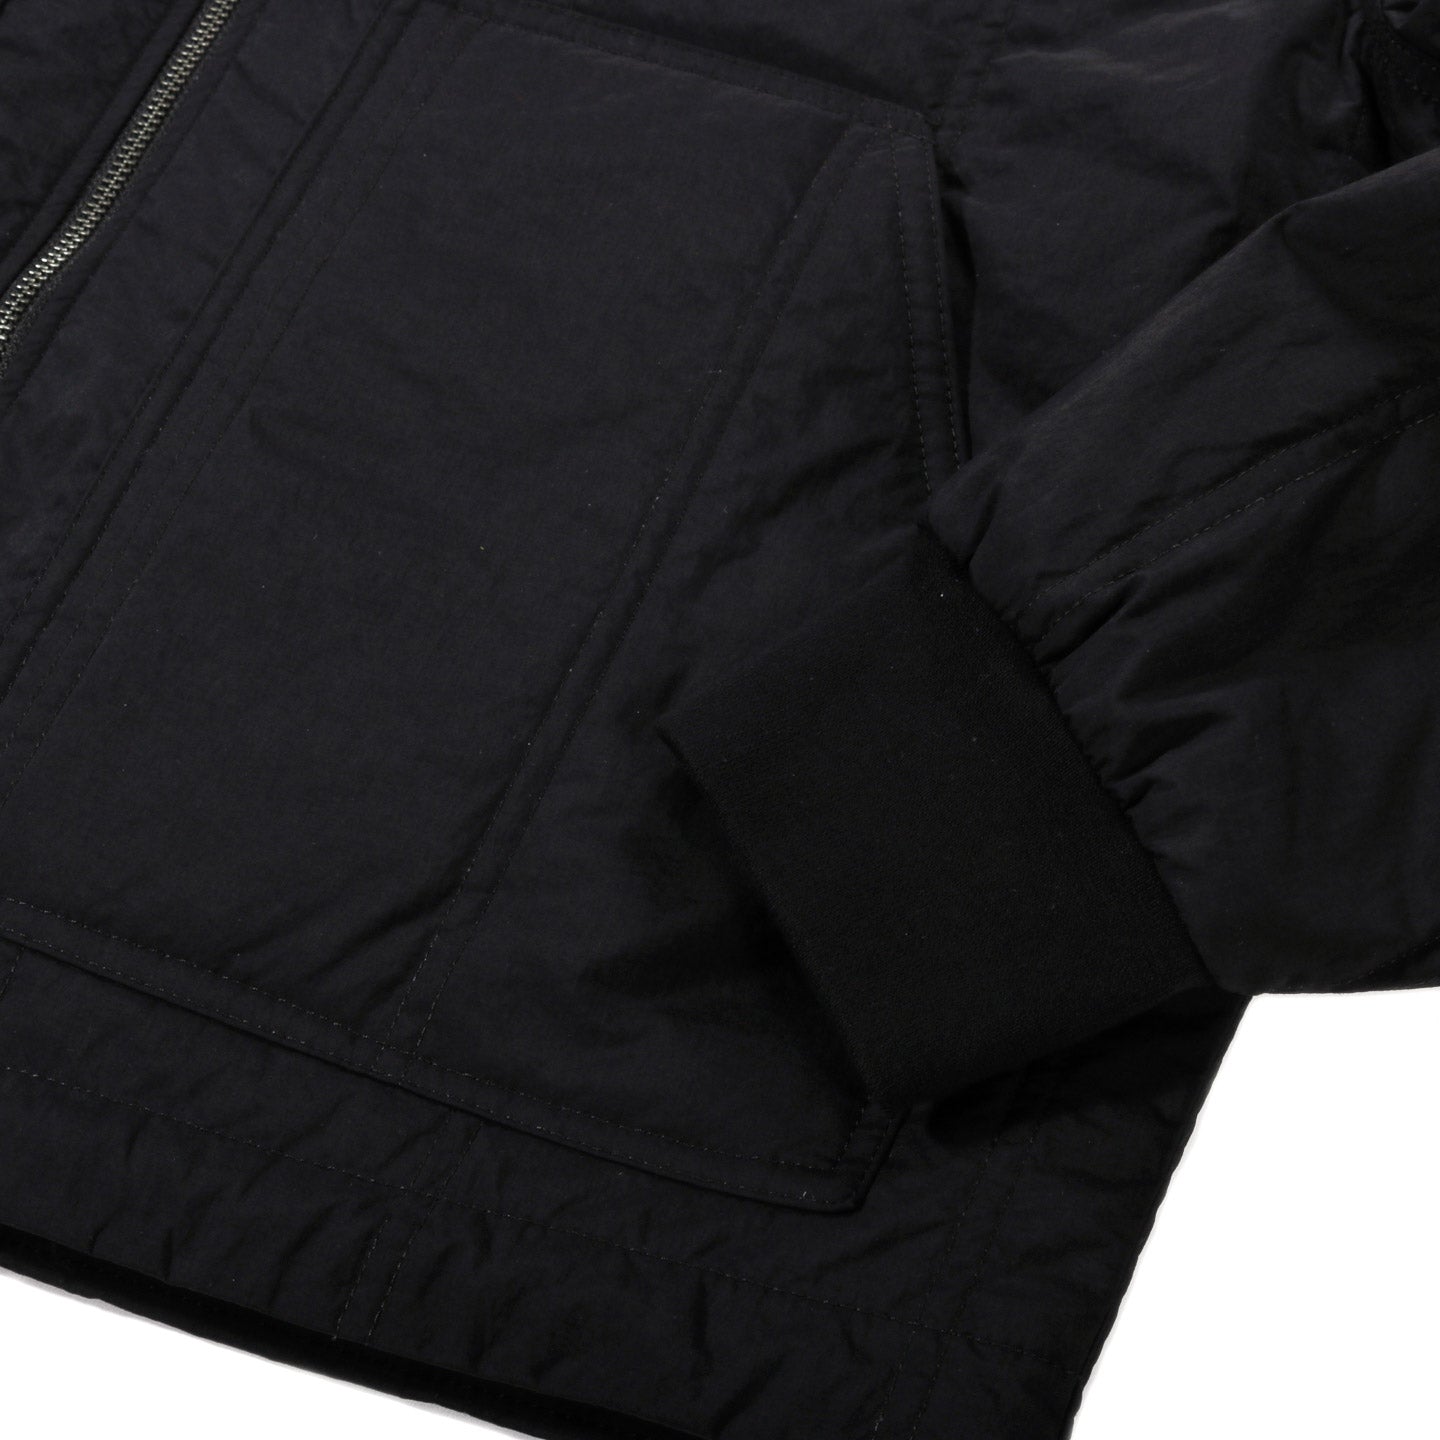 S.K. MANOR HILL BLITZ JACKET BLACK QUILTED REC NYLON WR